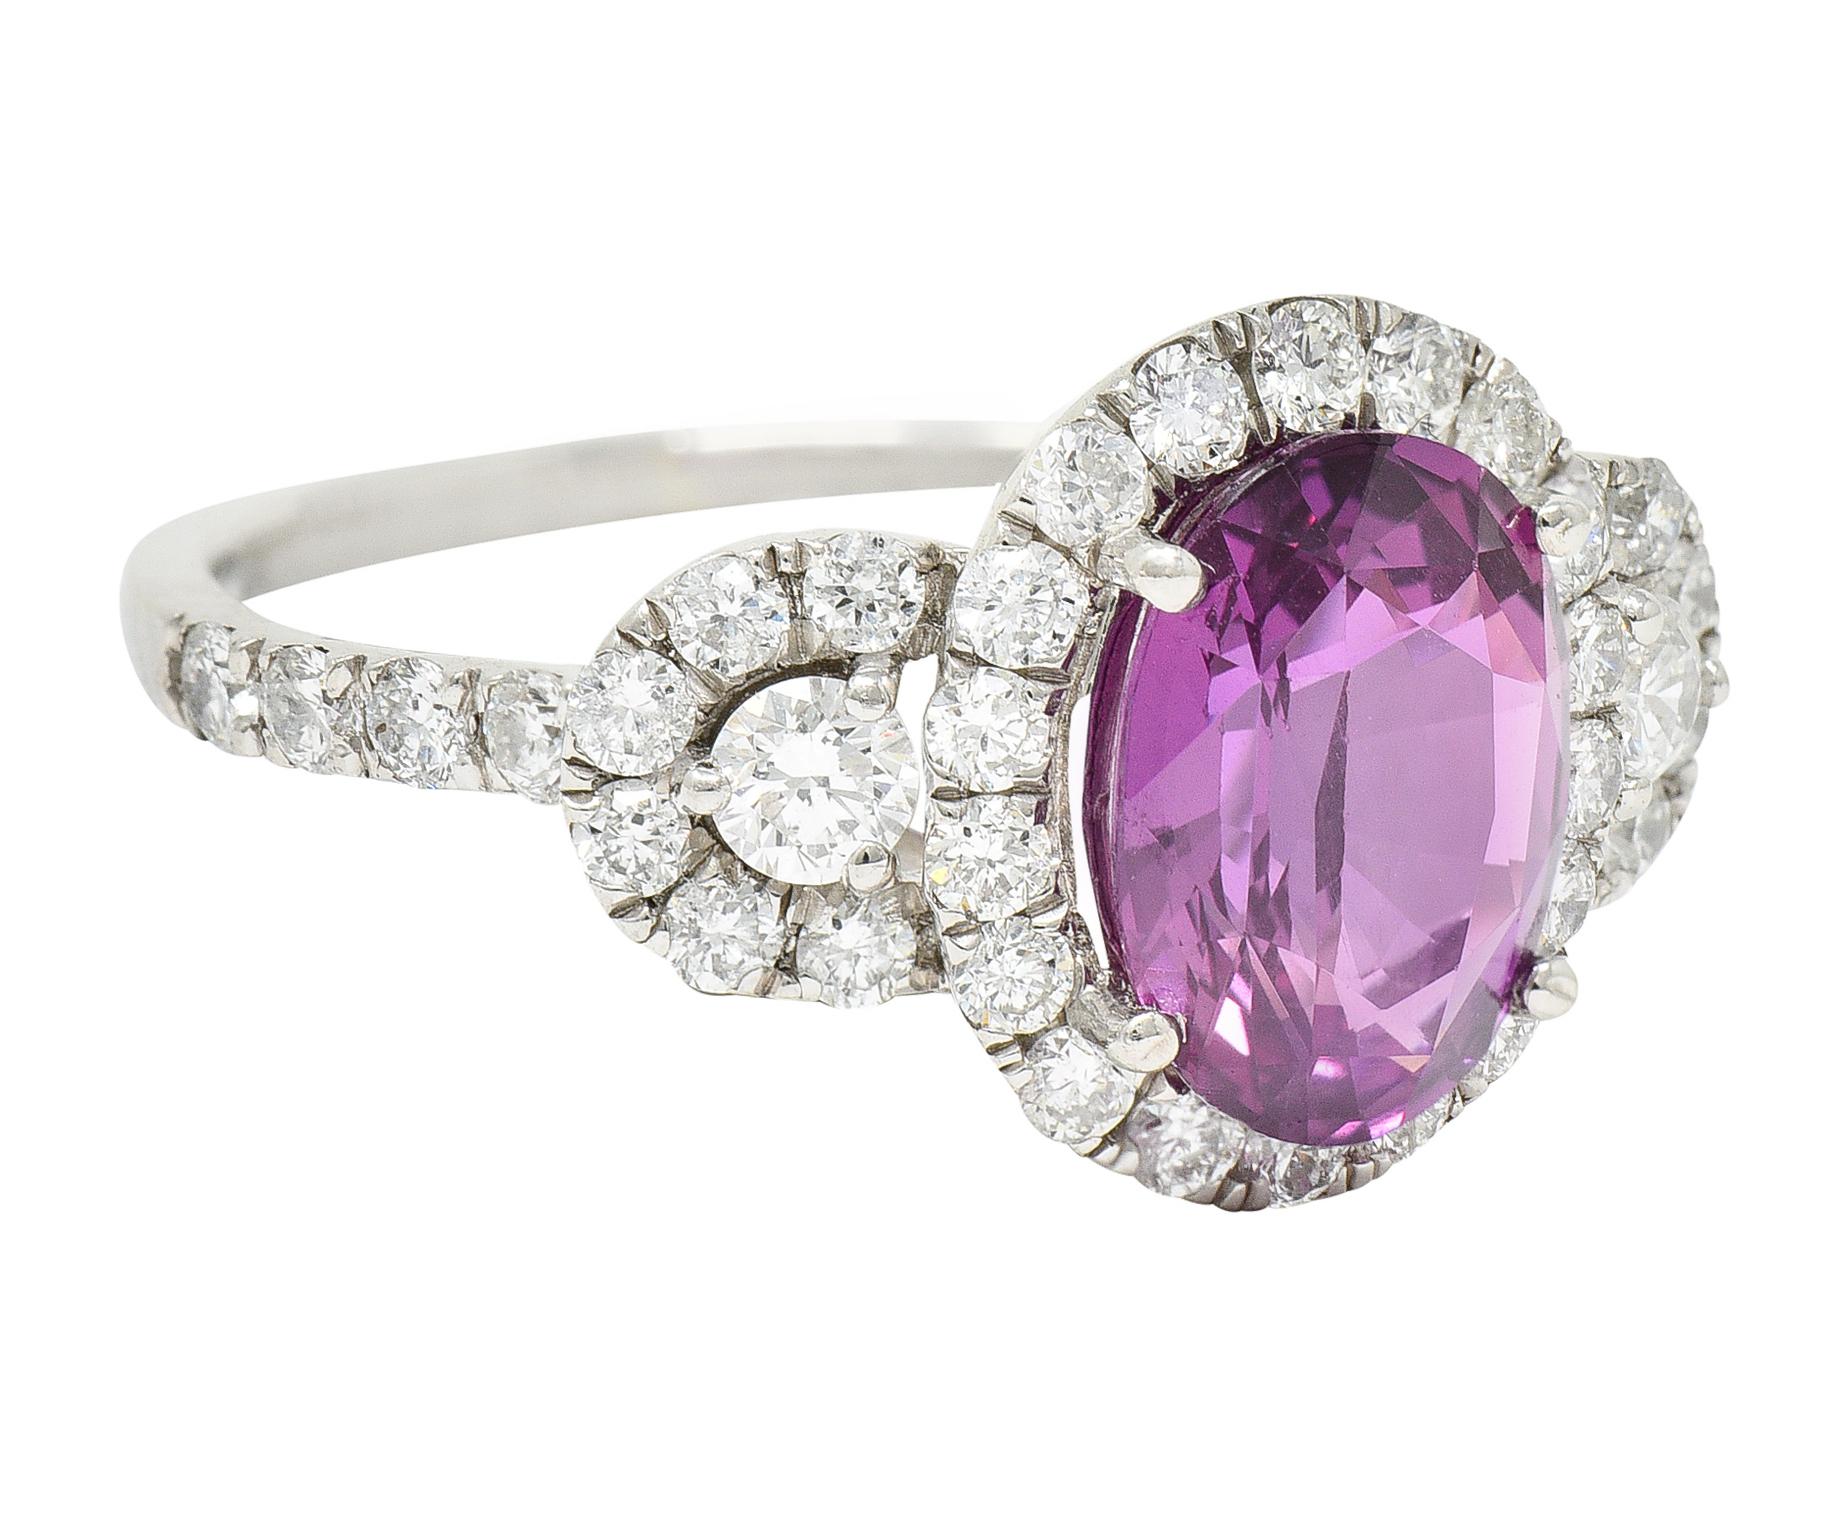 Featuring an oval mixed cut sapphire weighing approximately 2.20 carats

Eye clean with strong violetish pink color

Flanked by two round brilliant cut diamonds weighing collectively 0.15 carat

All three stones are encompassed by round brilliant